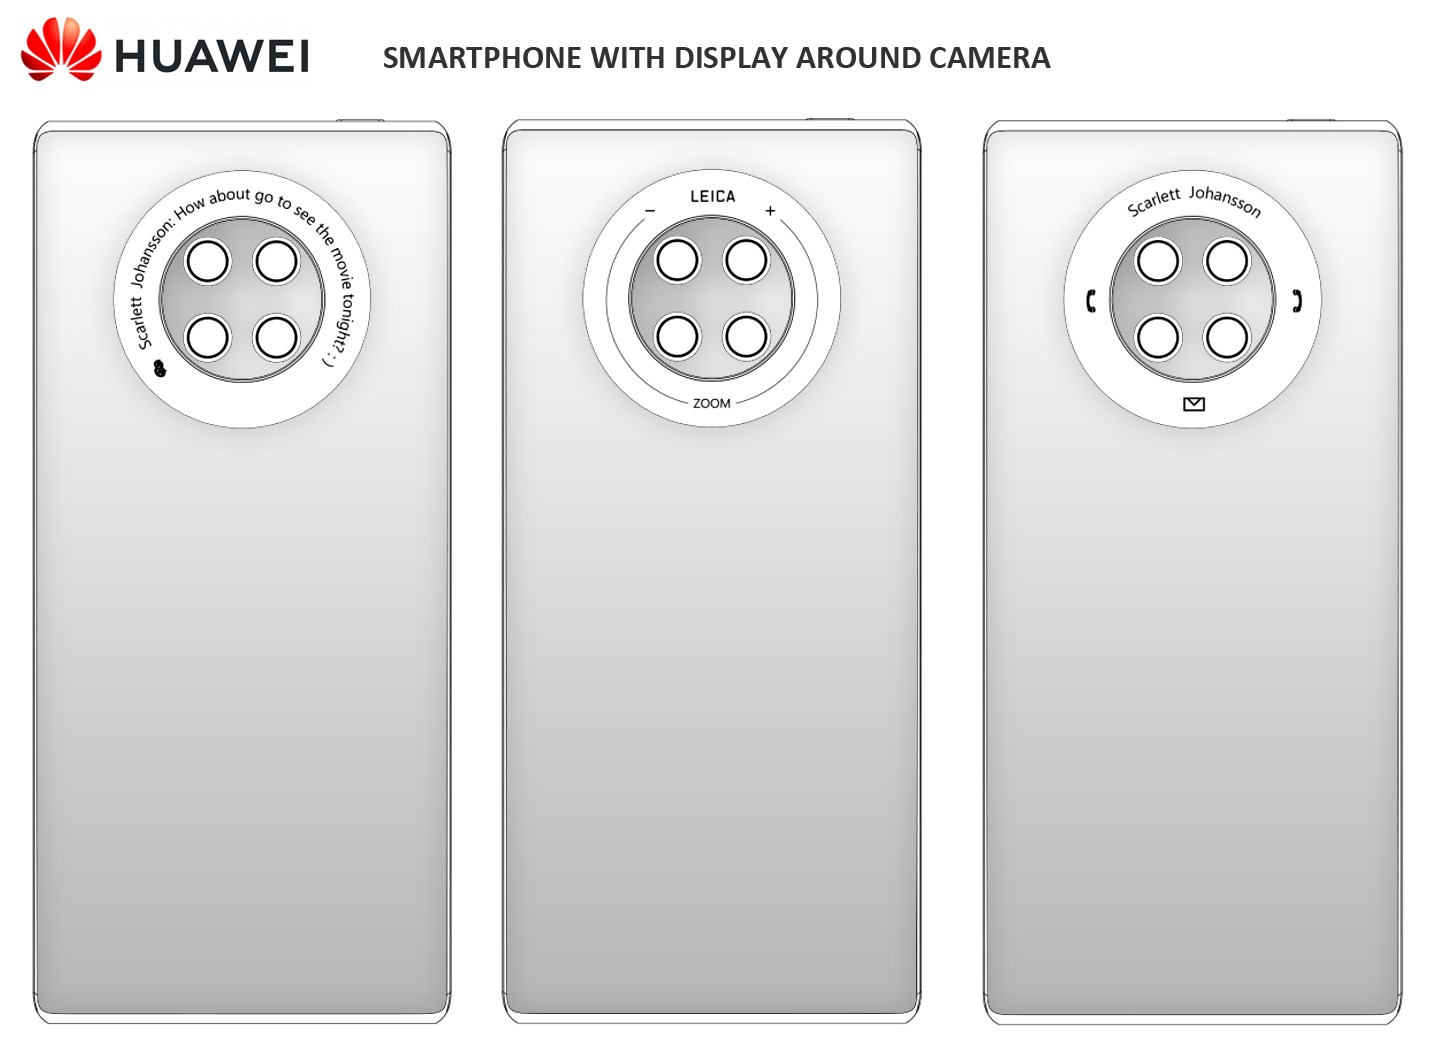 Huawei New Touch Camera Design